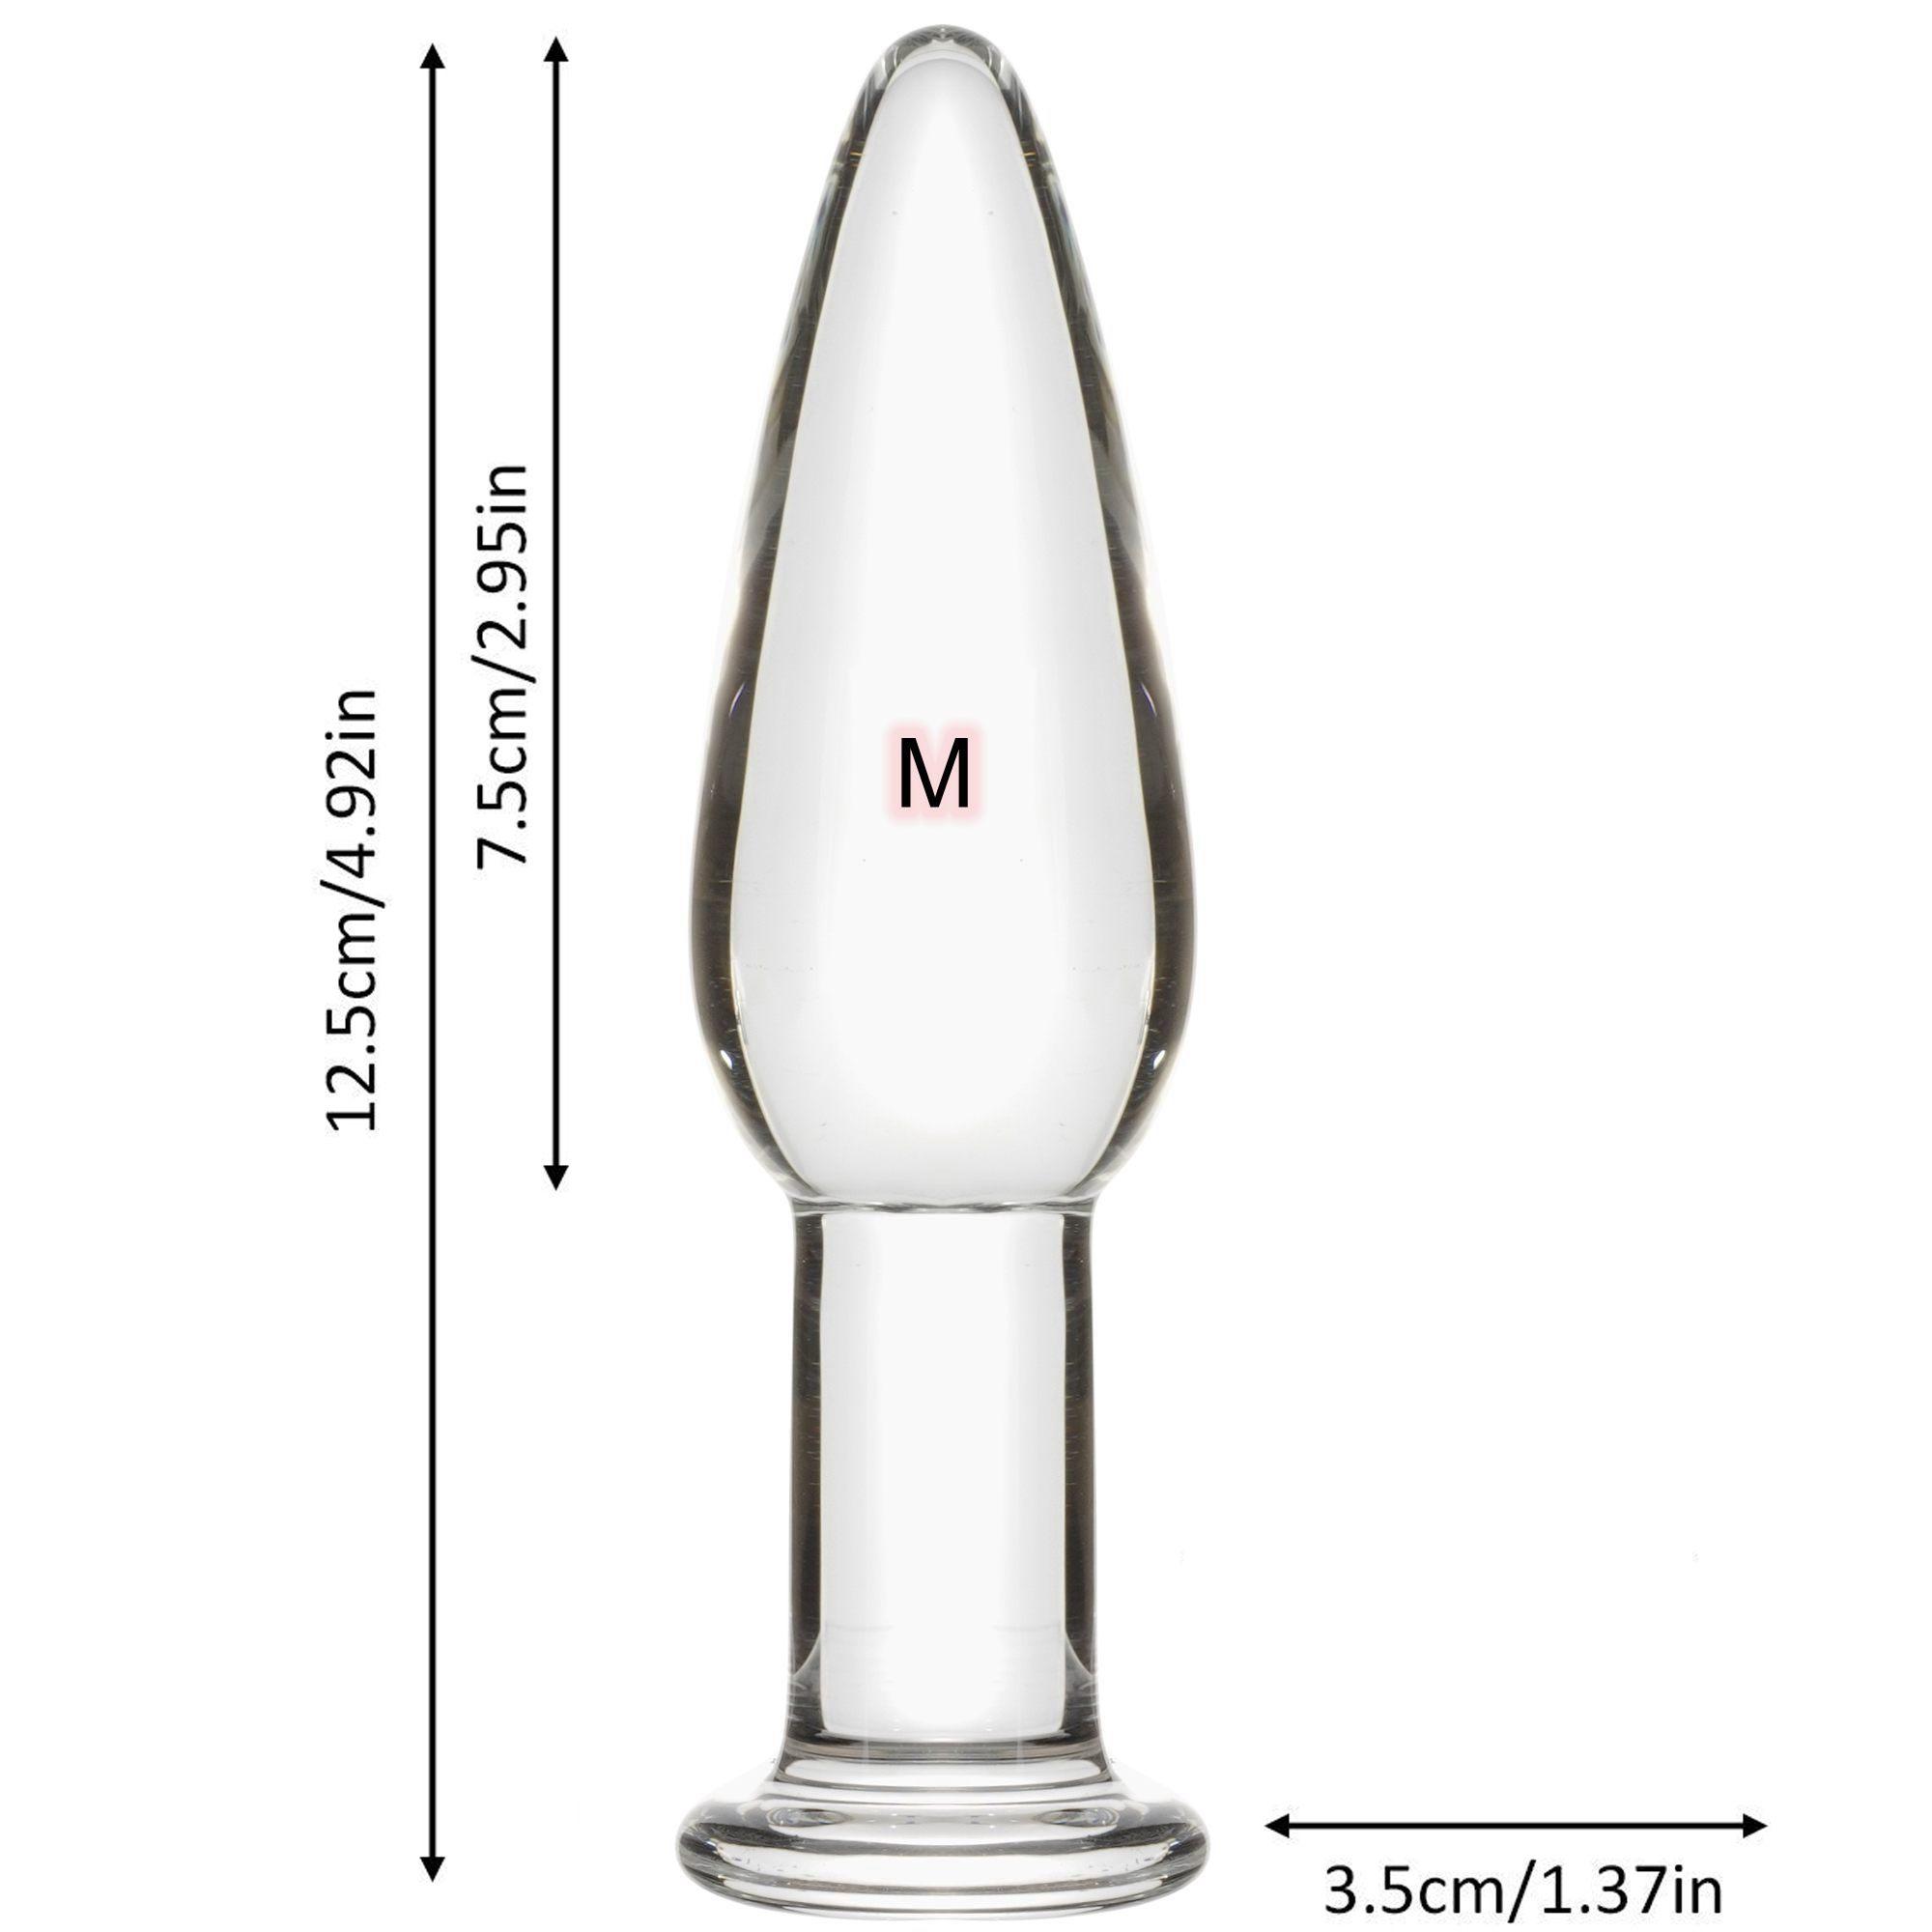 Factory Wholesale Price Oem Odm Size M Glass Anal Plug Crystal Glass Anal Dildo Anus Toys For Women Men Lesbian Couple